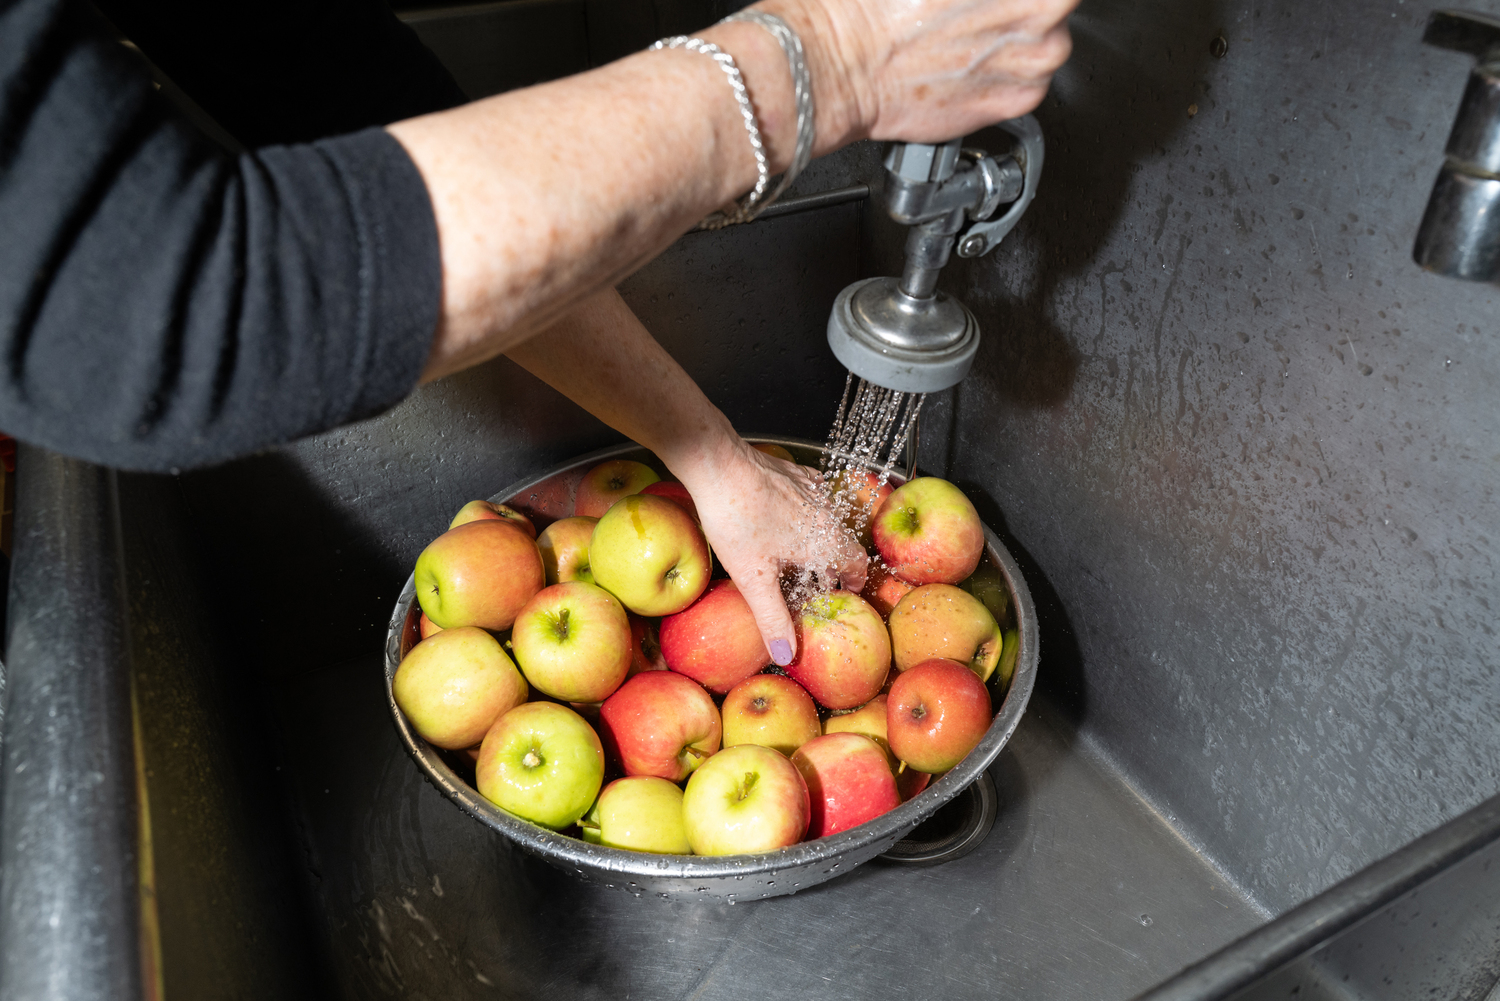 Apples are washed before being peeled. LORI HAWKINS